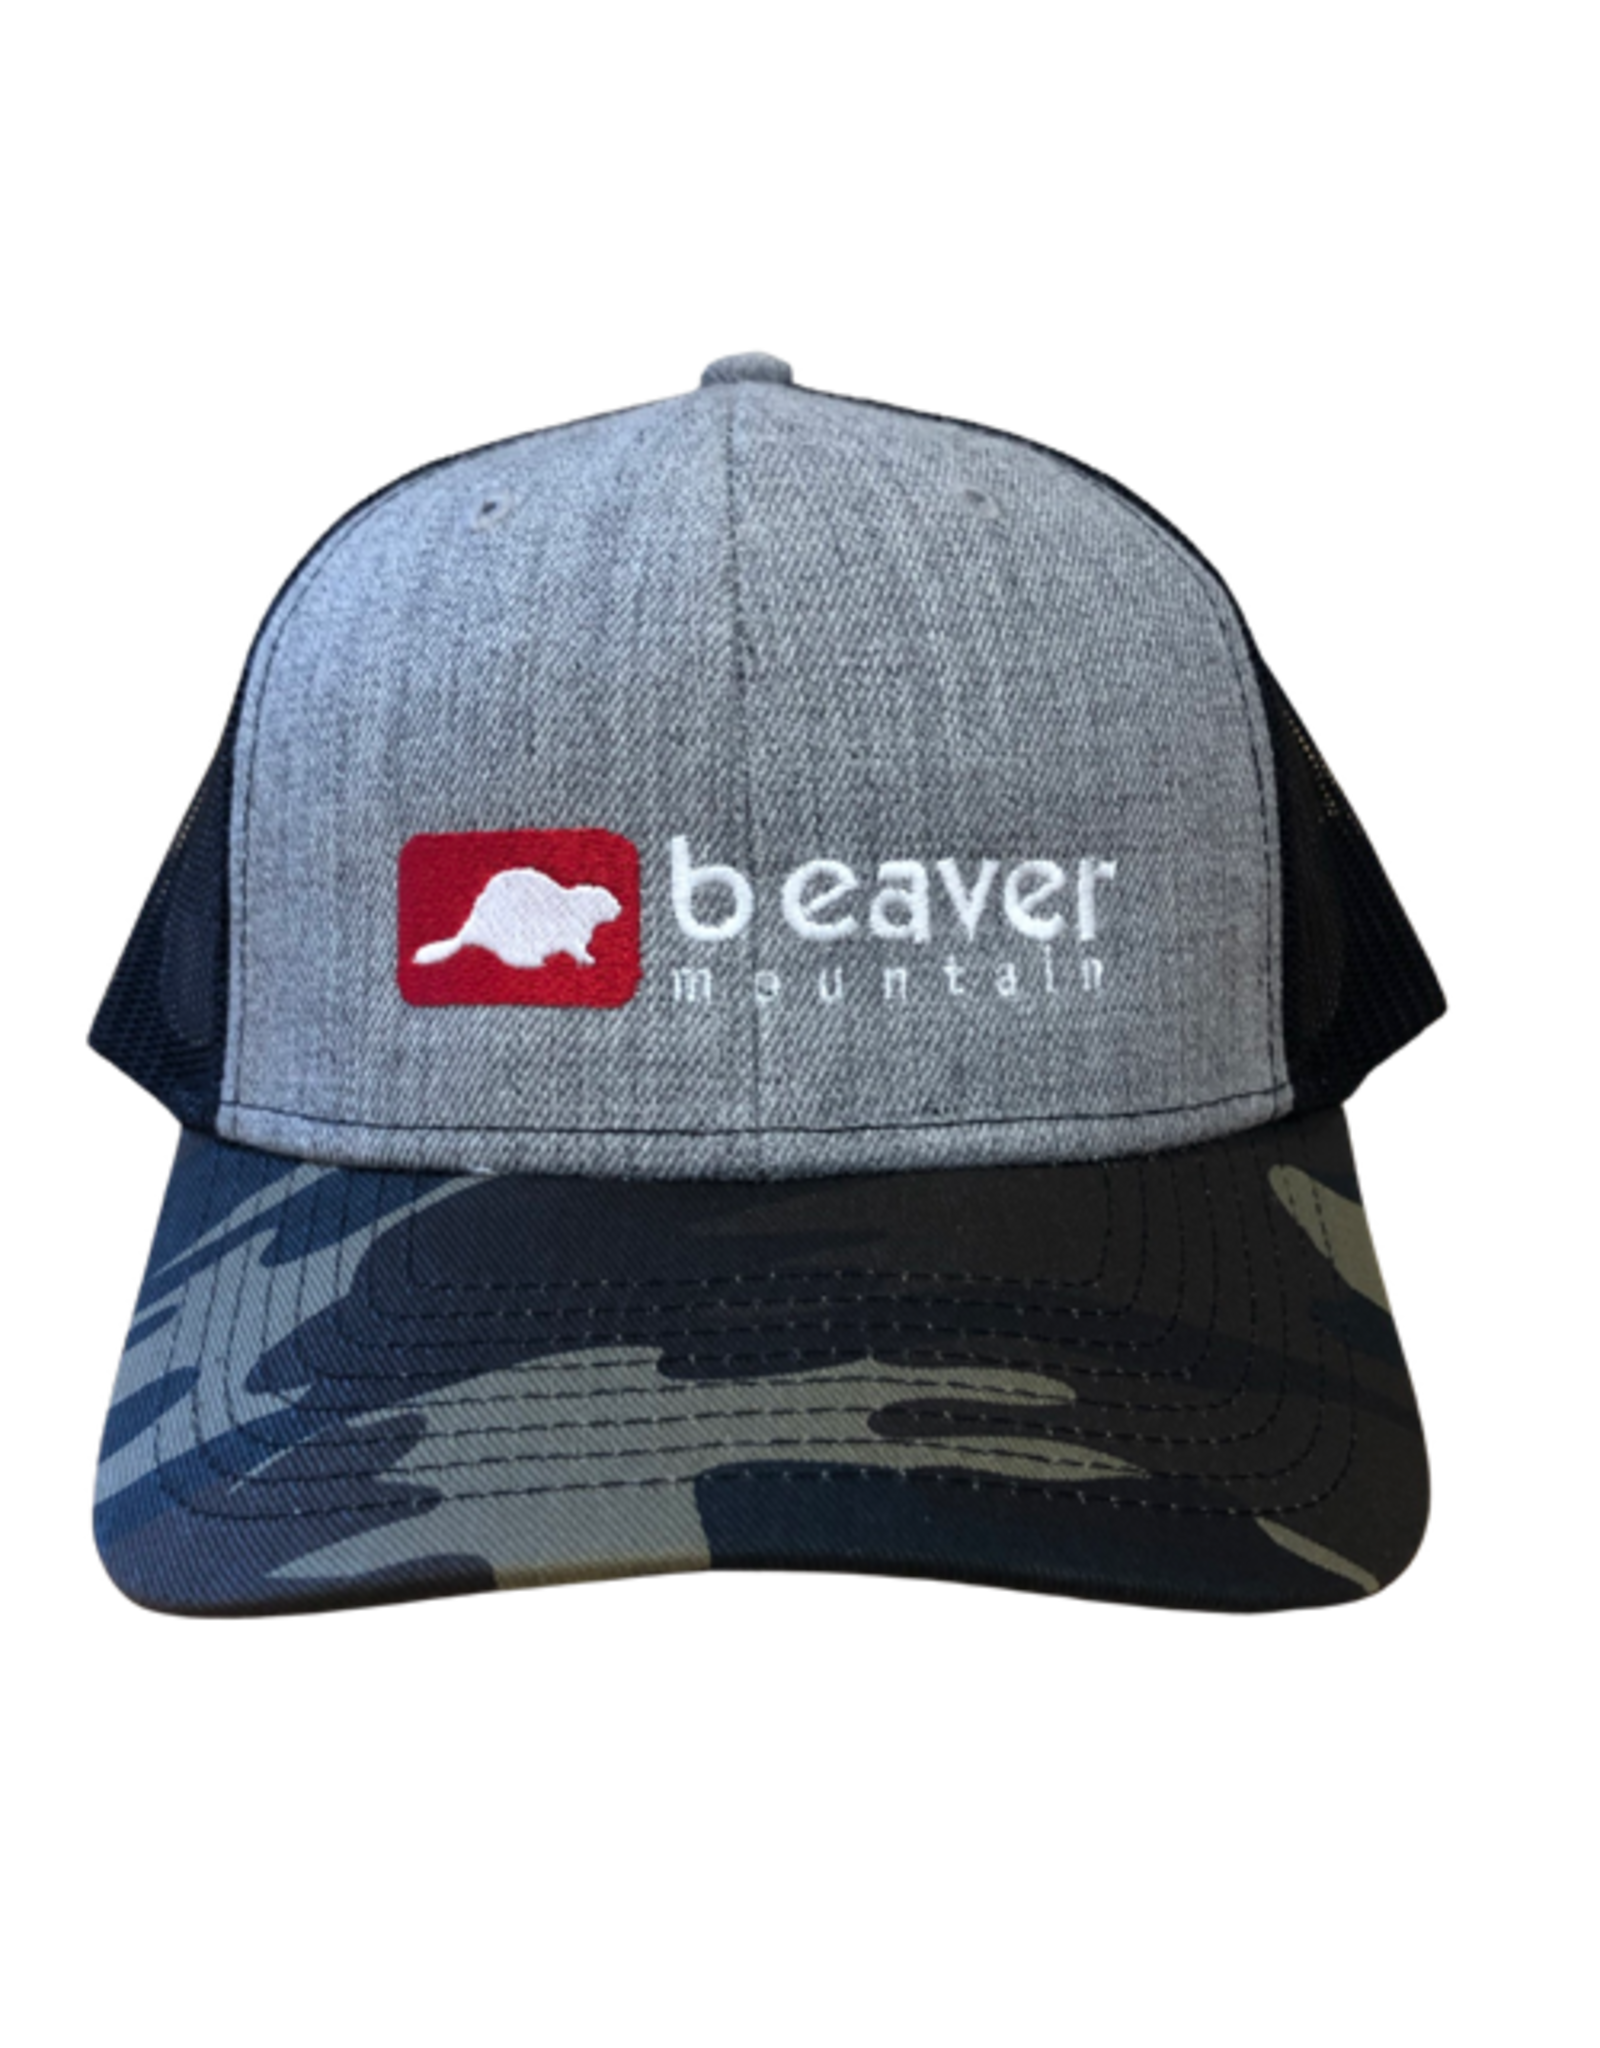 Ouray Ouray Zone Trucker Heather Grey Camo Hat